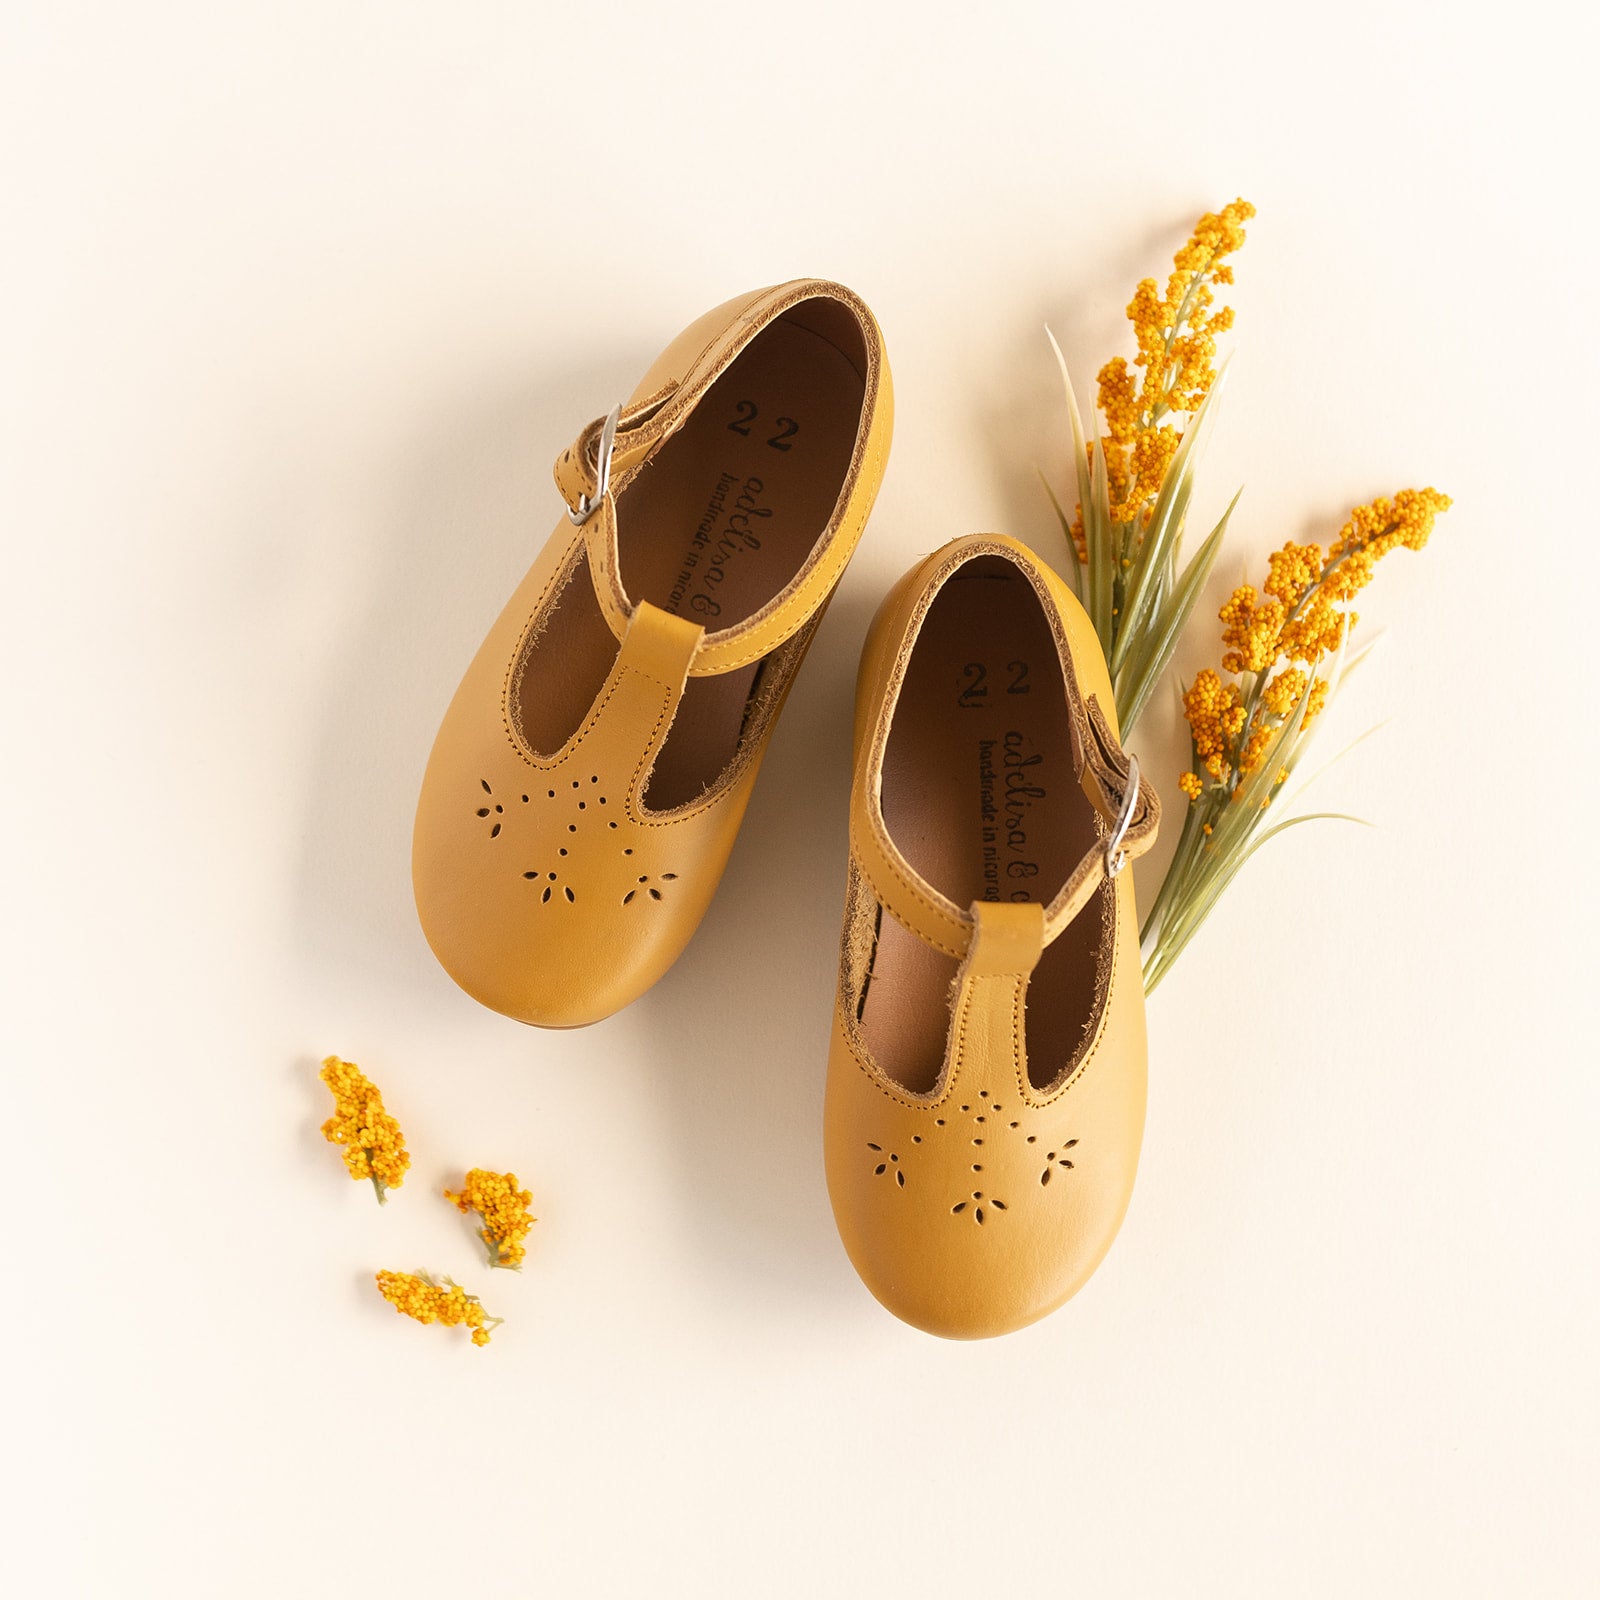 Adelisa & Co mustard yellow leather shoes for girls with floral detailing.